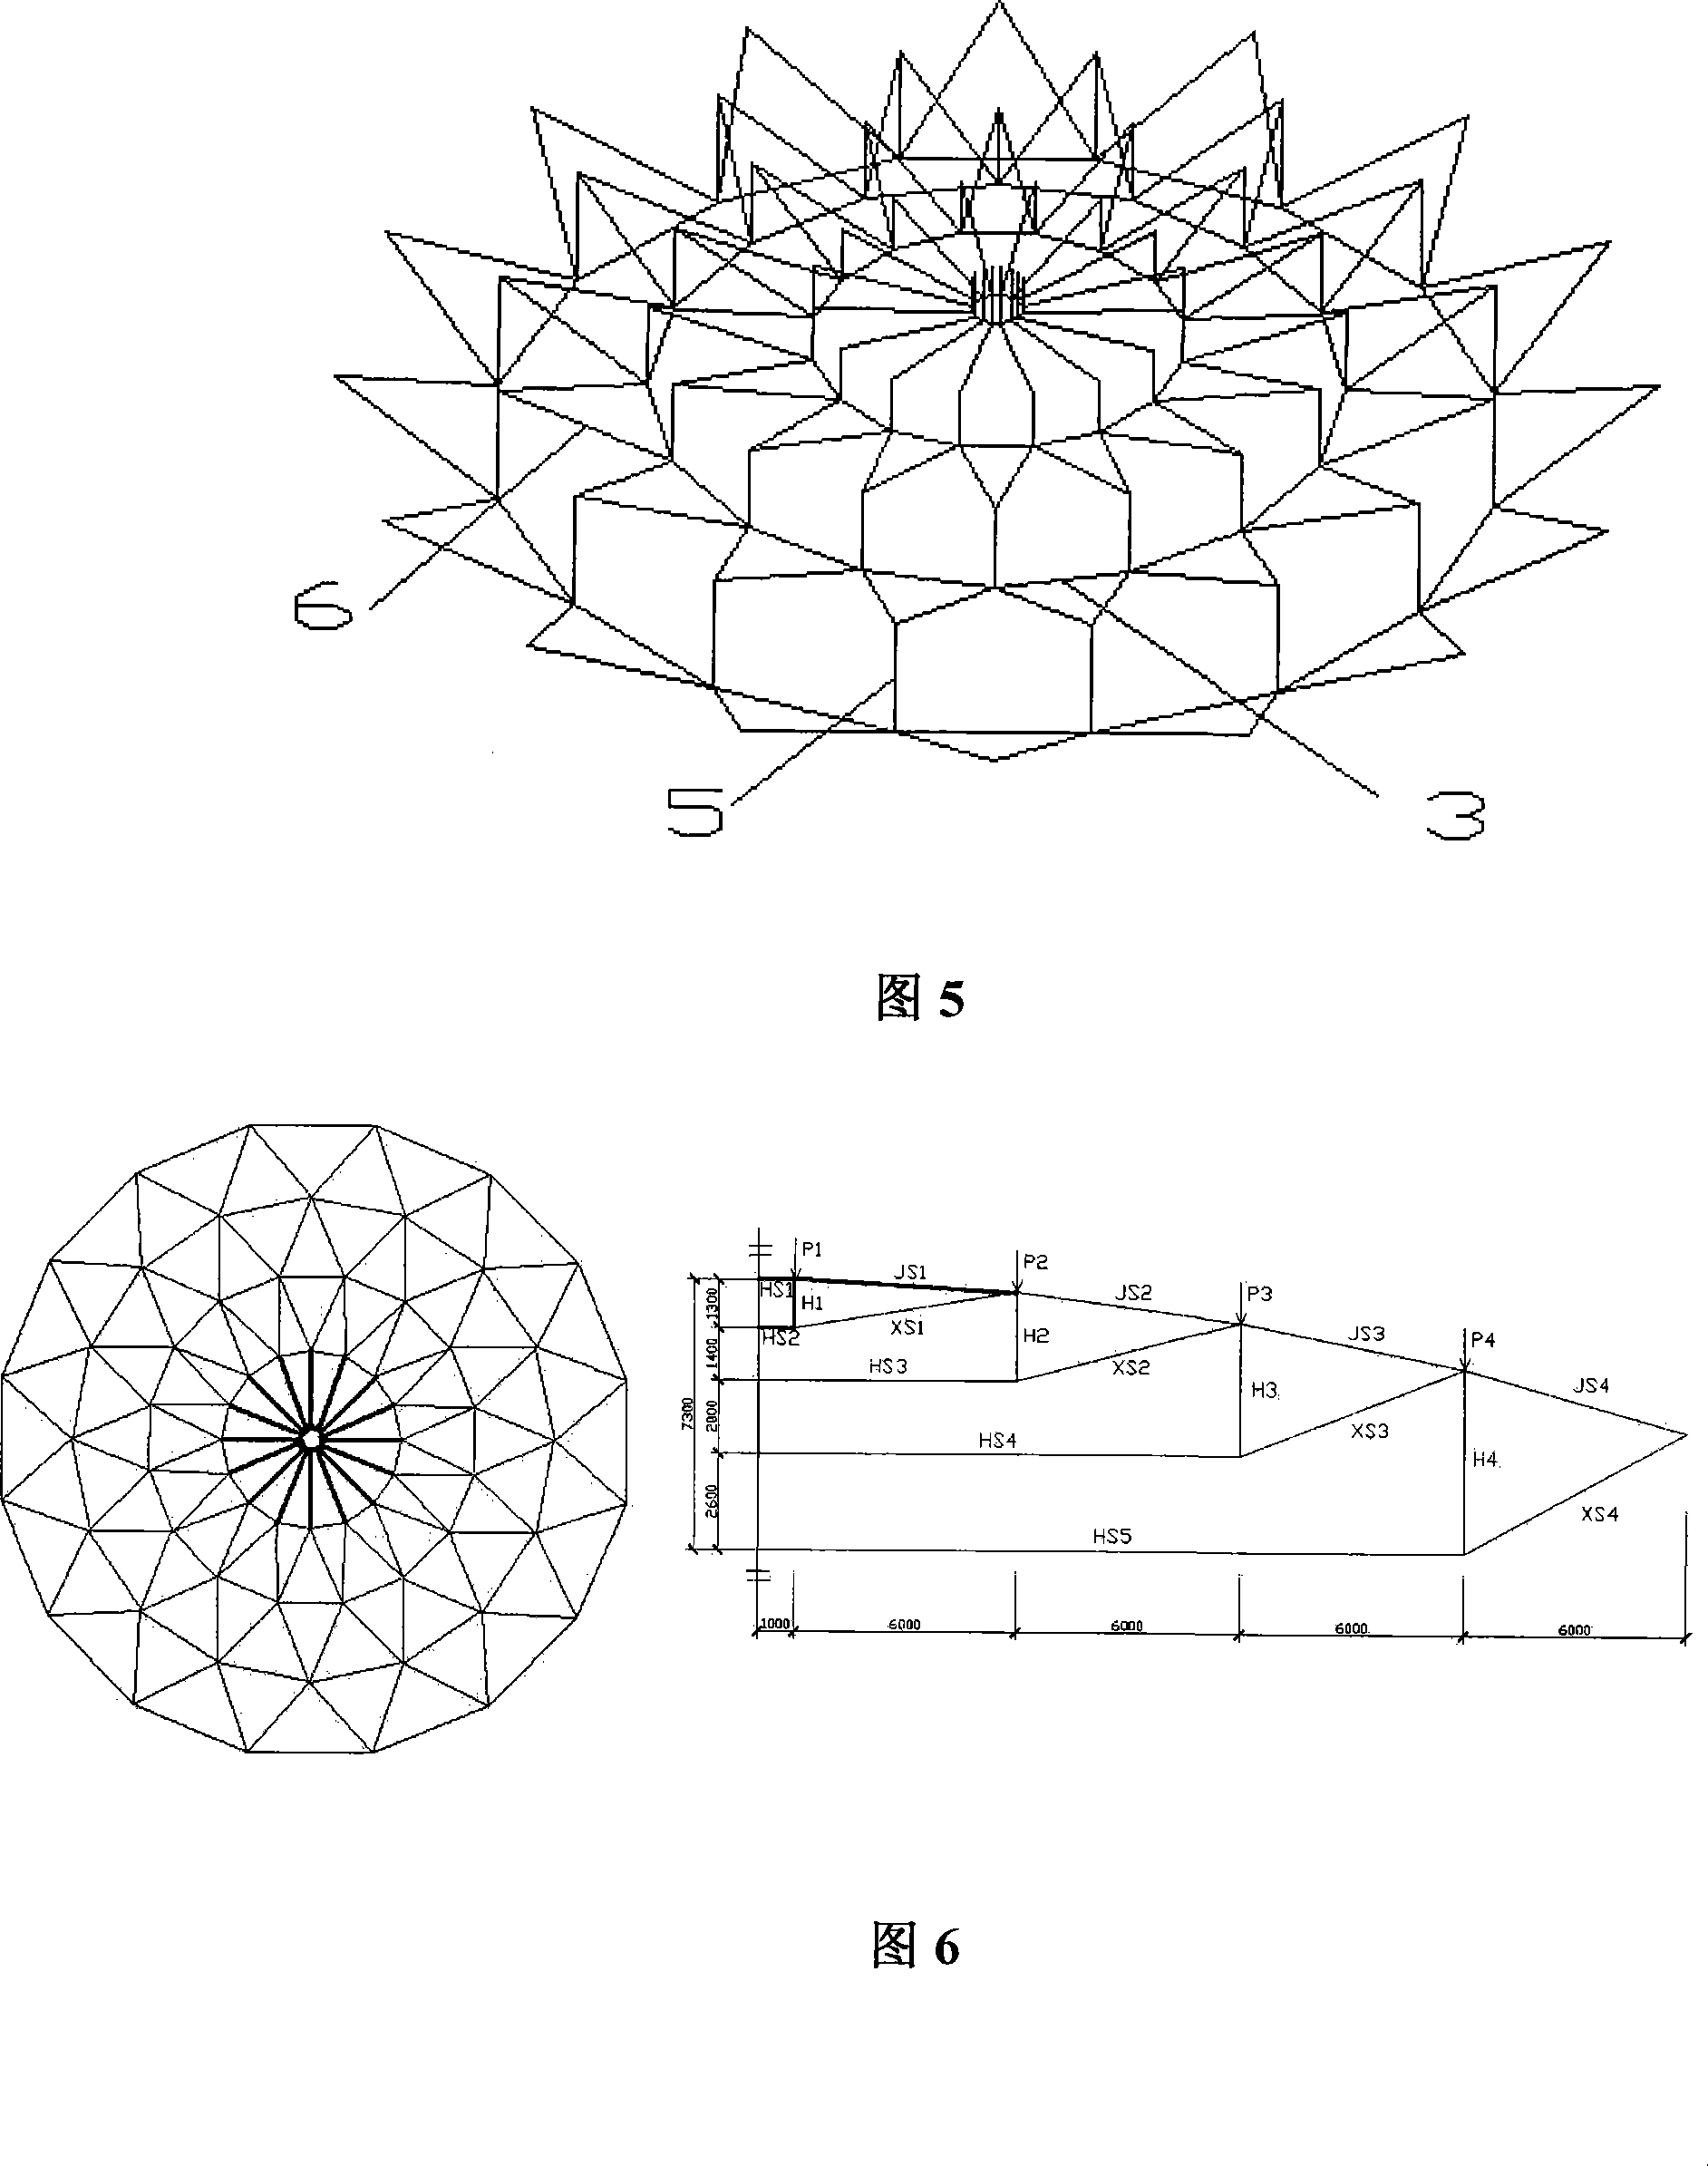 Sunflower-shaped cable dome structure